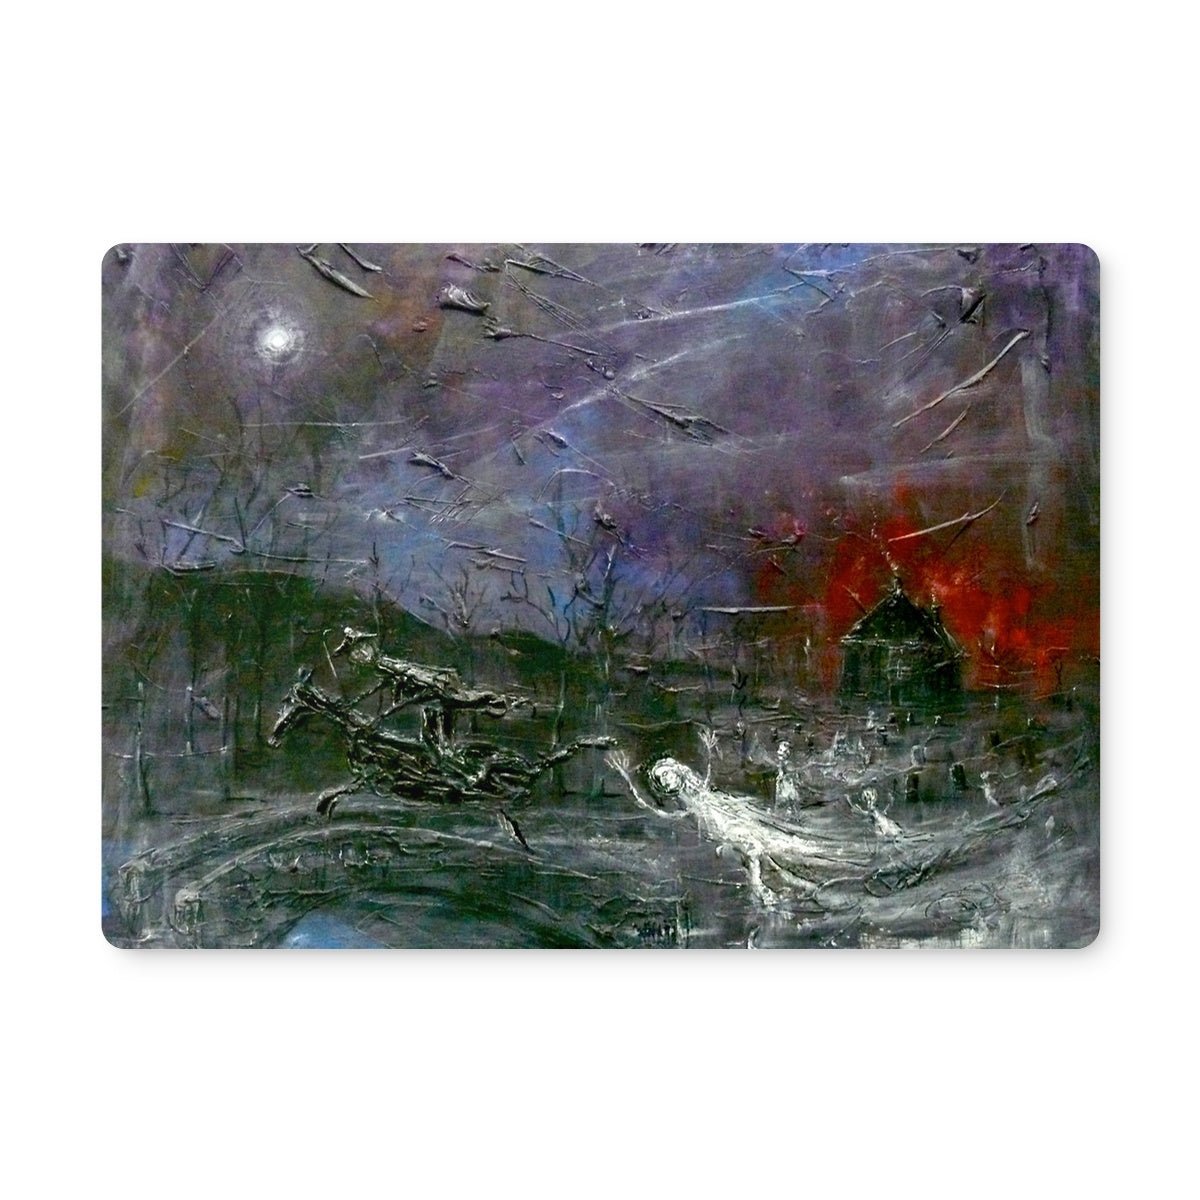 Tam O Shanter Art Gifts Placemat-Placemats-Abstract & Impressionistic Art Gallery-2 Placemats-Paintings, Prints, Homeware, Art Gifts From Scotland By Scottish Artist Kevin Hunter